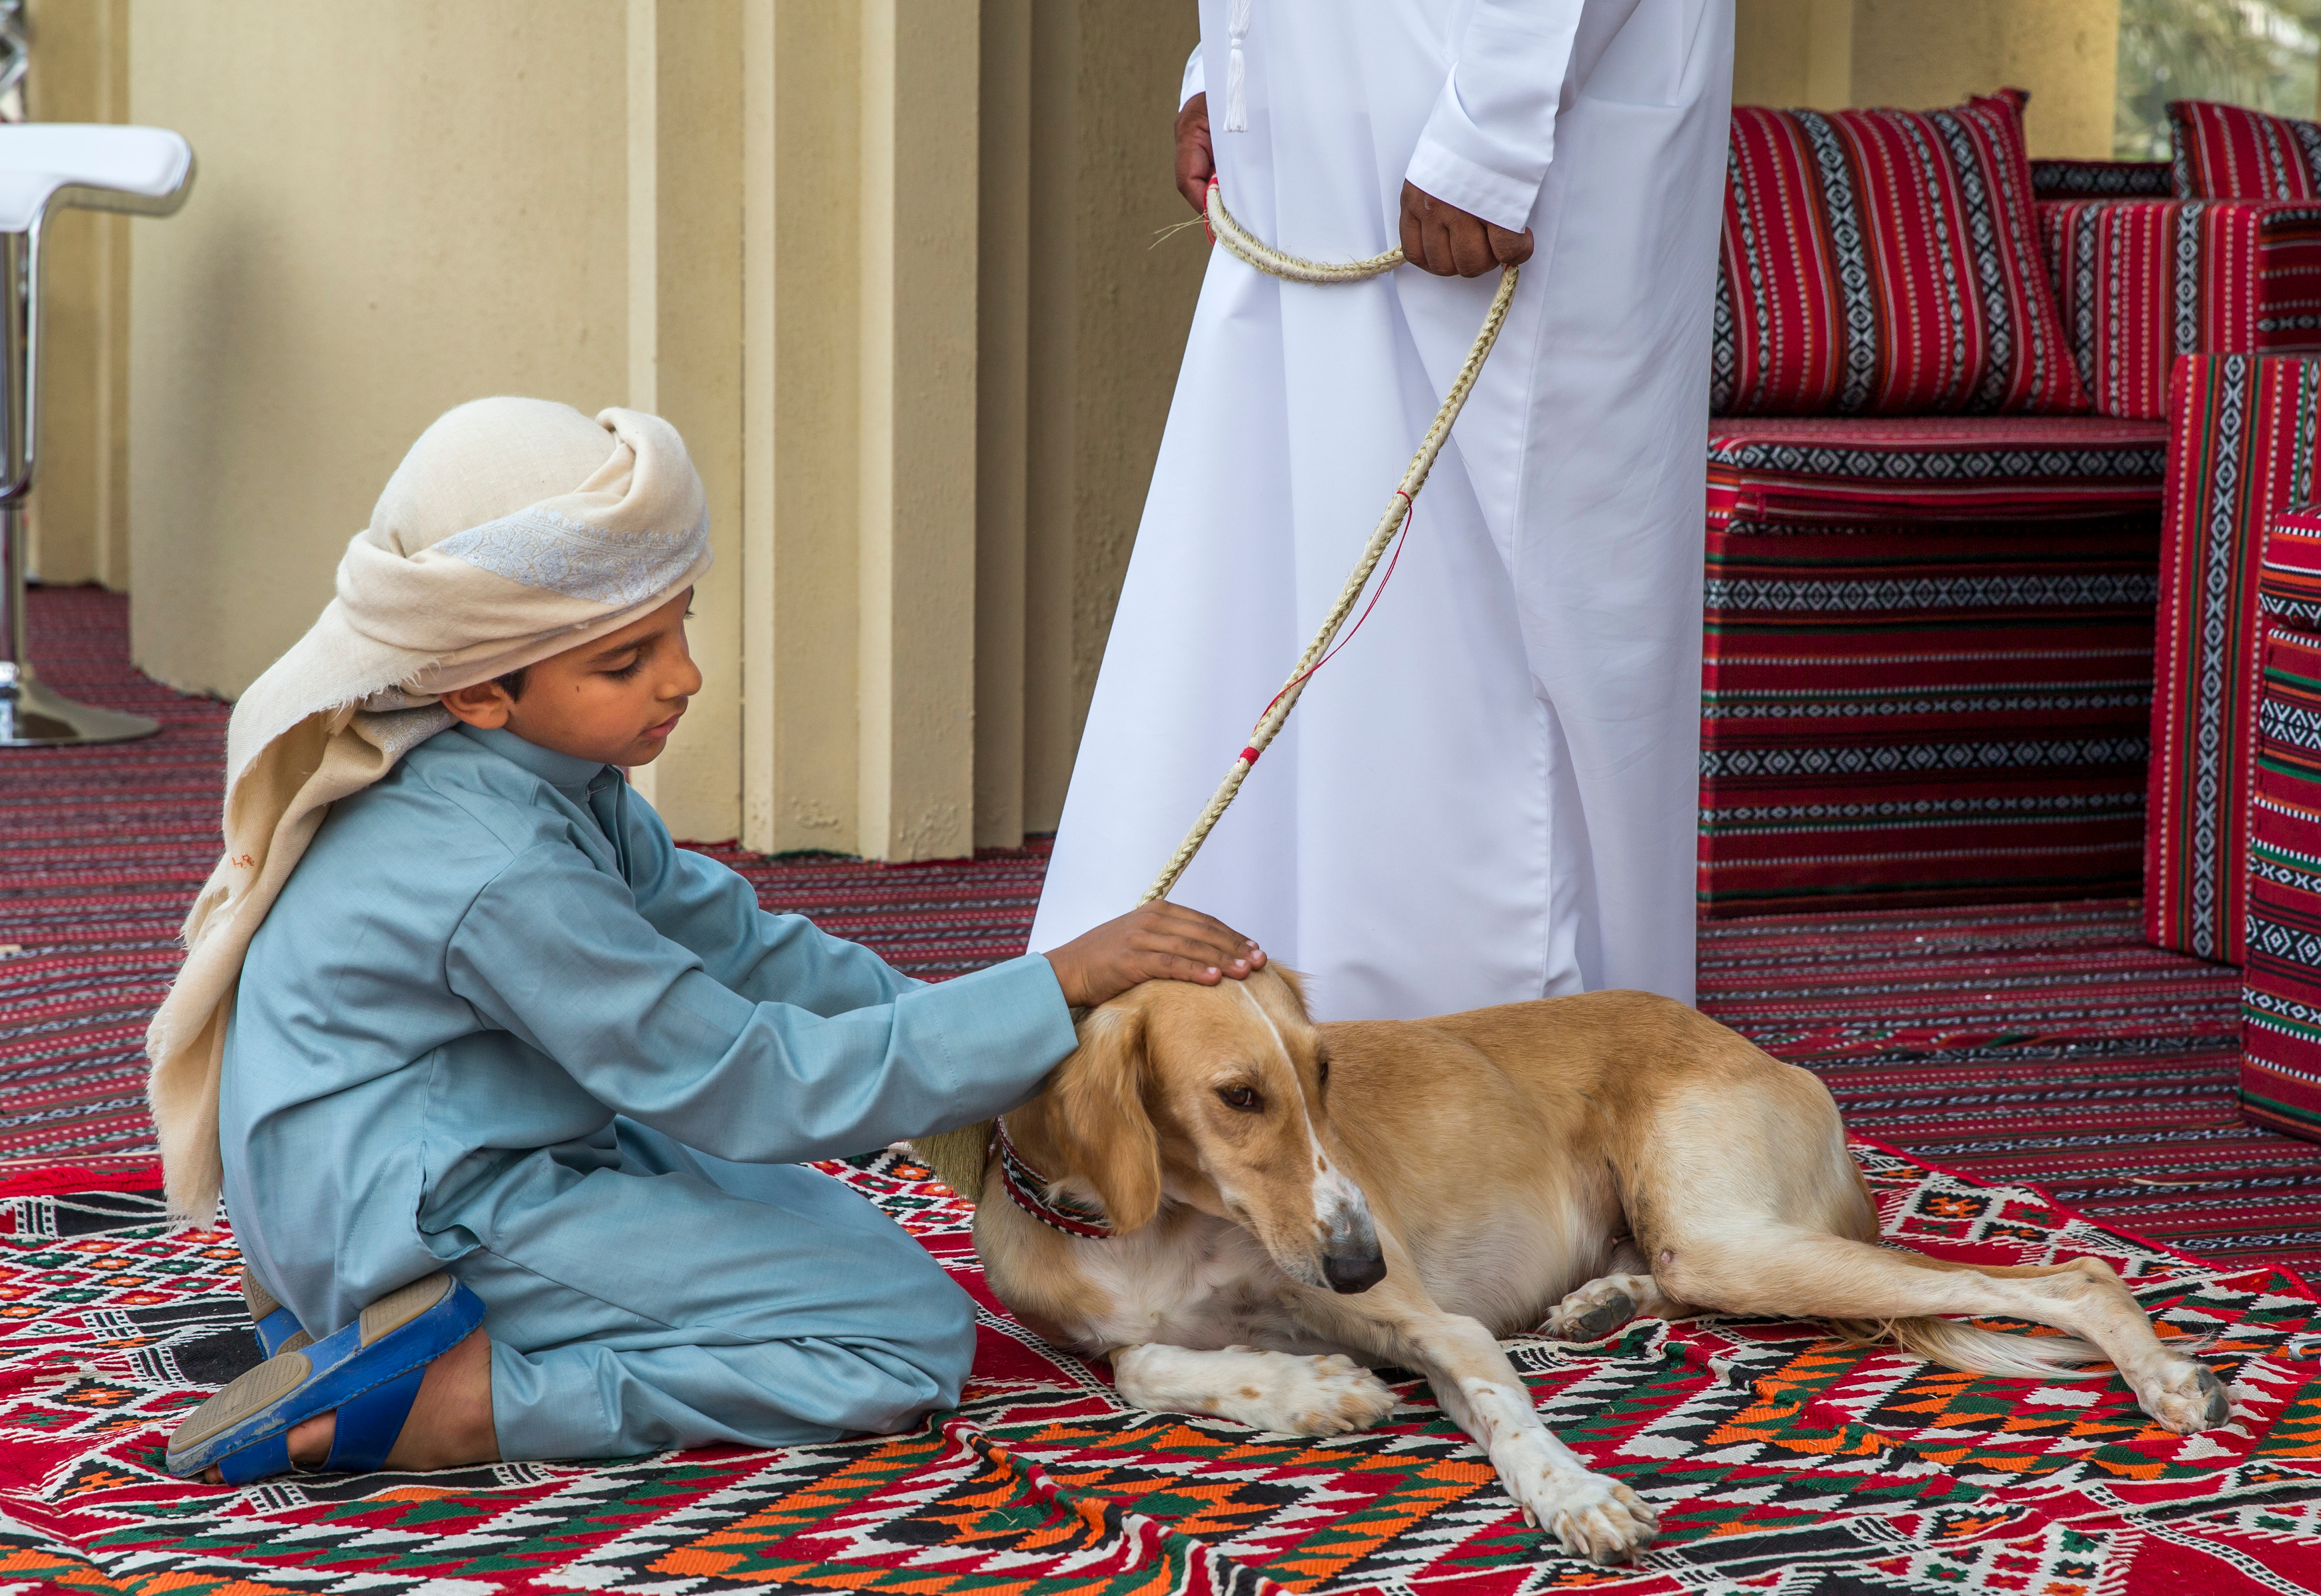 The pet industry in the Middle East